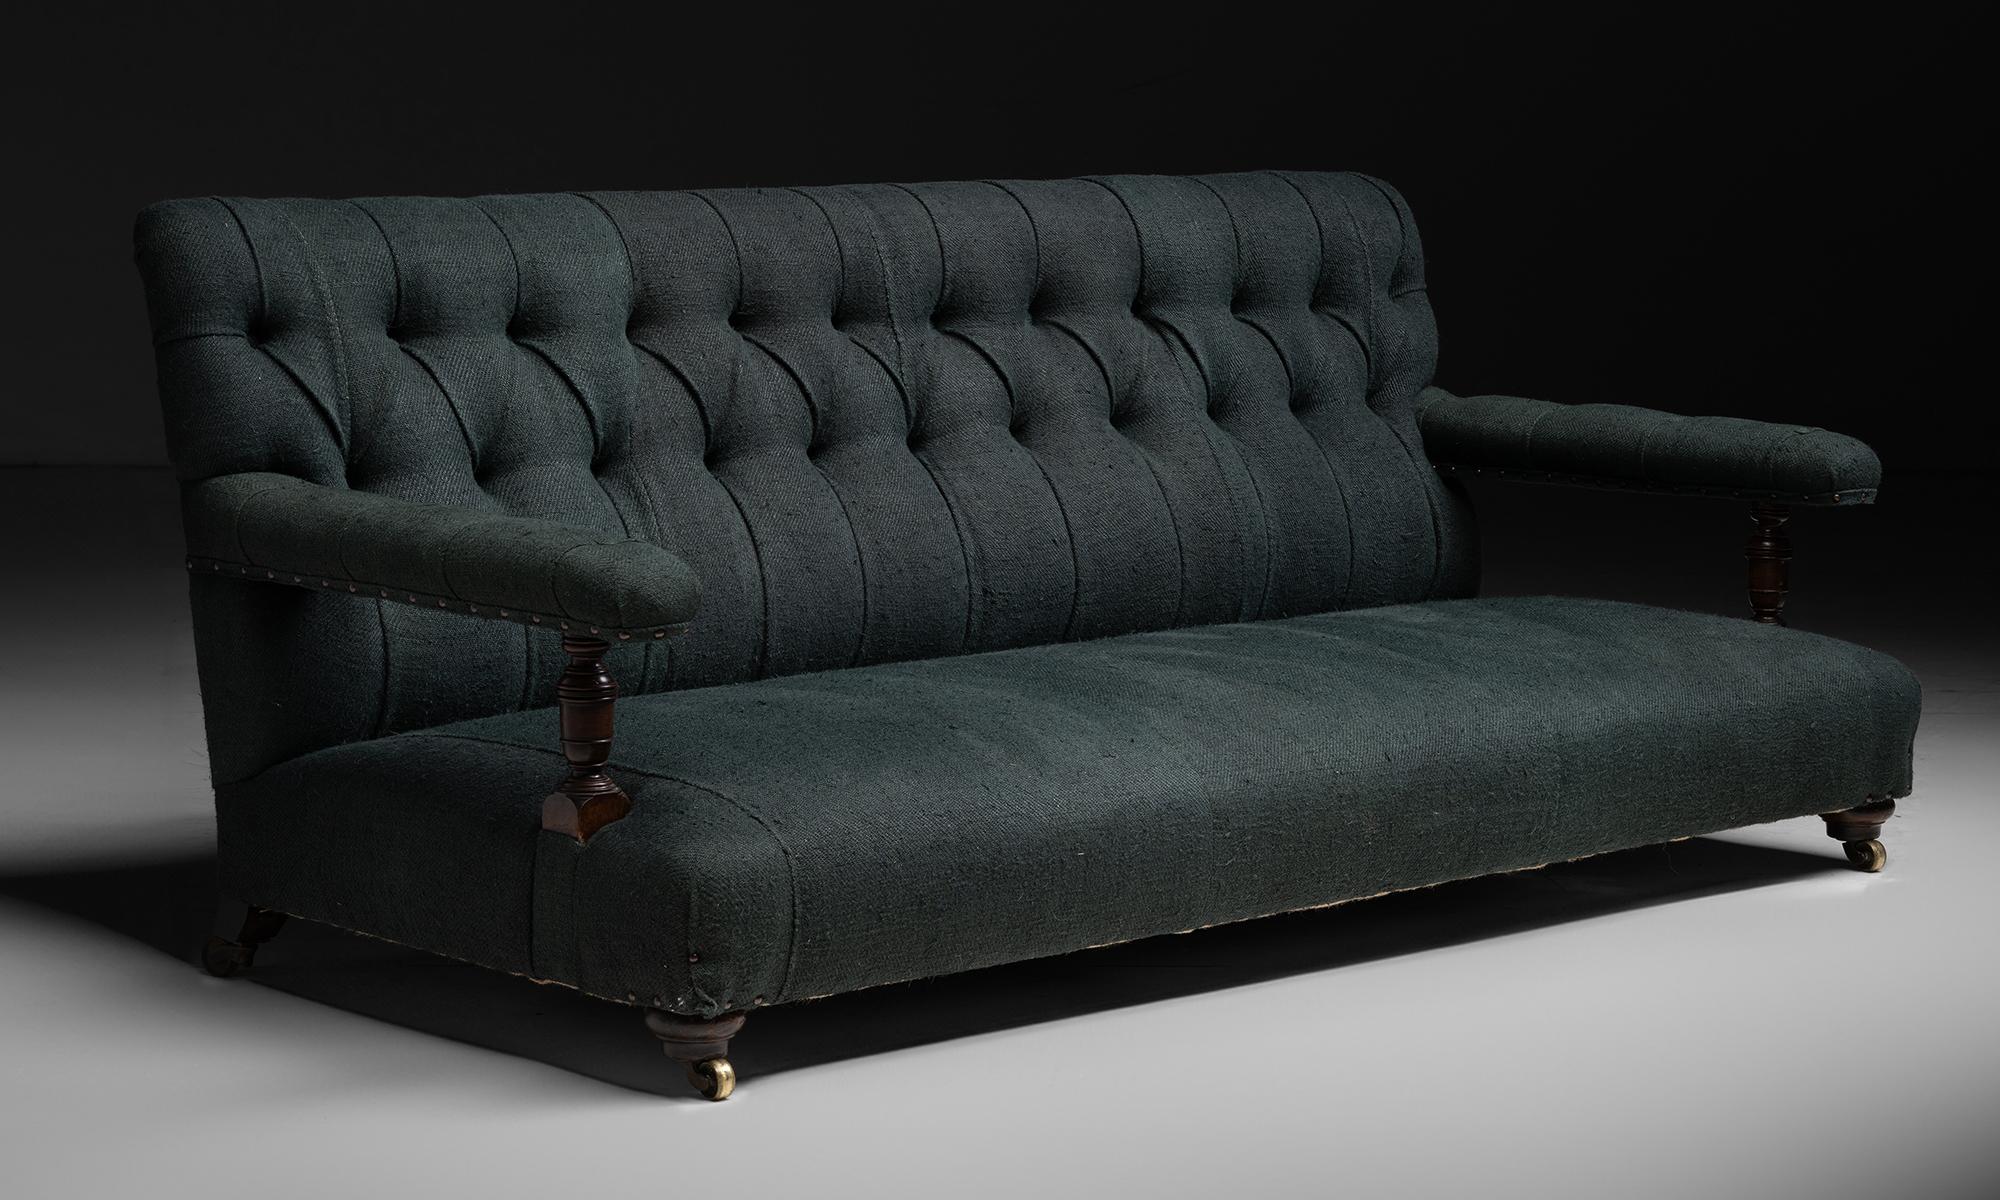 Howard & Sons Sofa

England circa 1880

Low seated turned walnut legs, upholstered in hand-dyed dark green grain sacks.

75”L x 32”d x 31”h x 9”seat